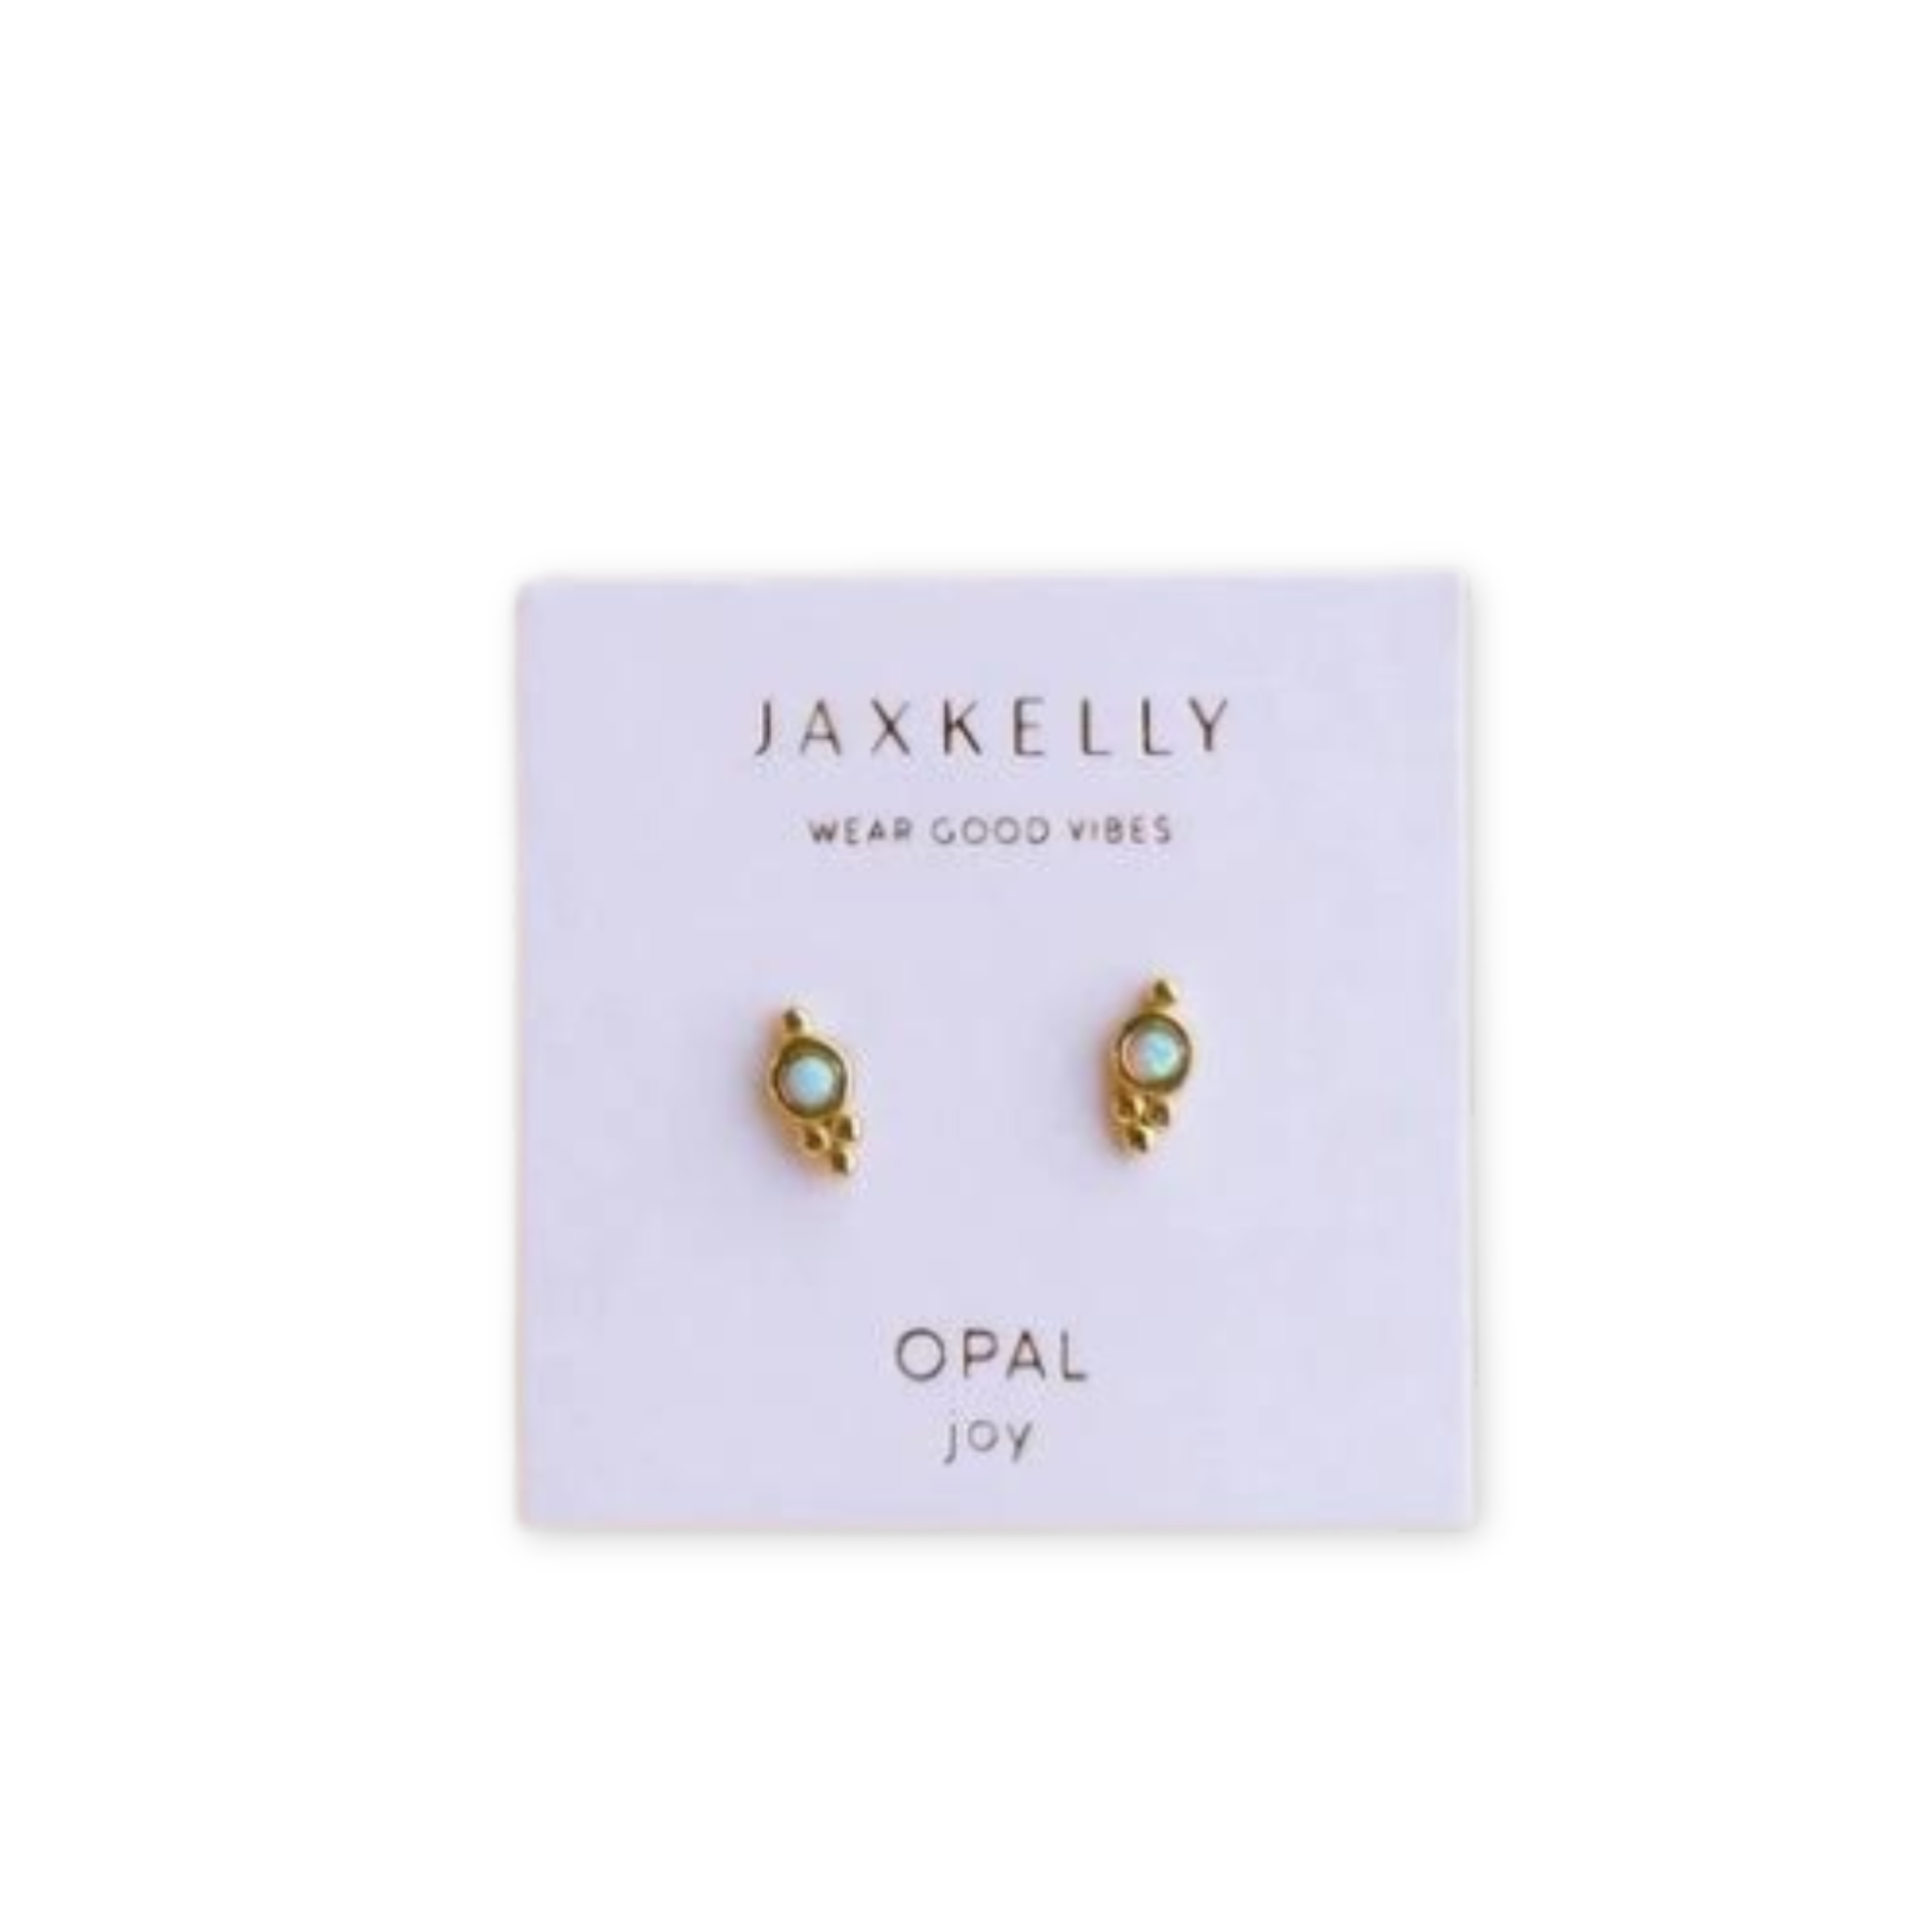 fire opal stud earrings with a cluster of three small gold balls